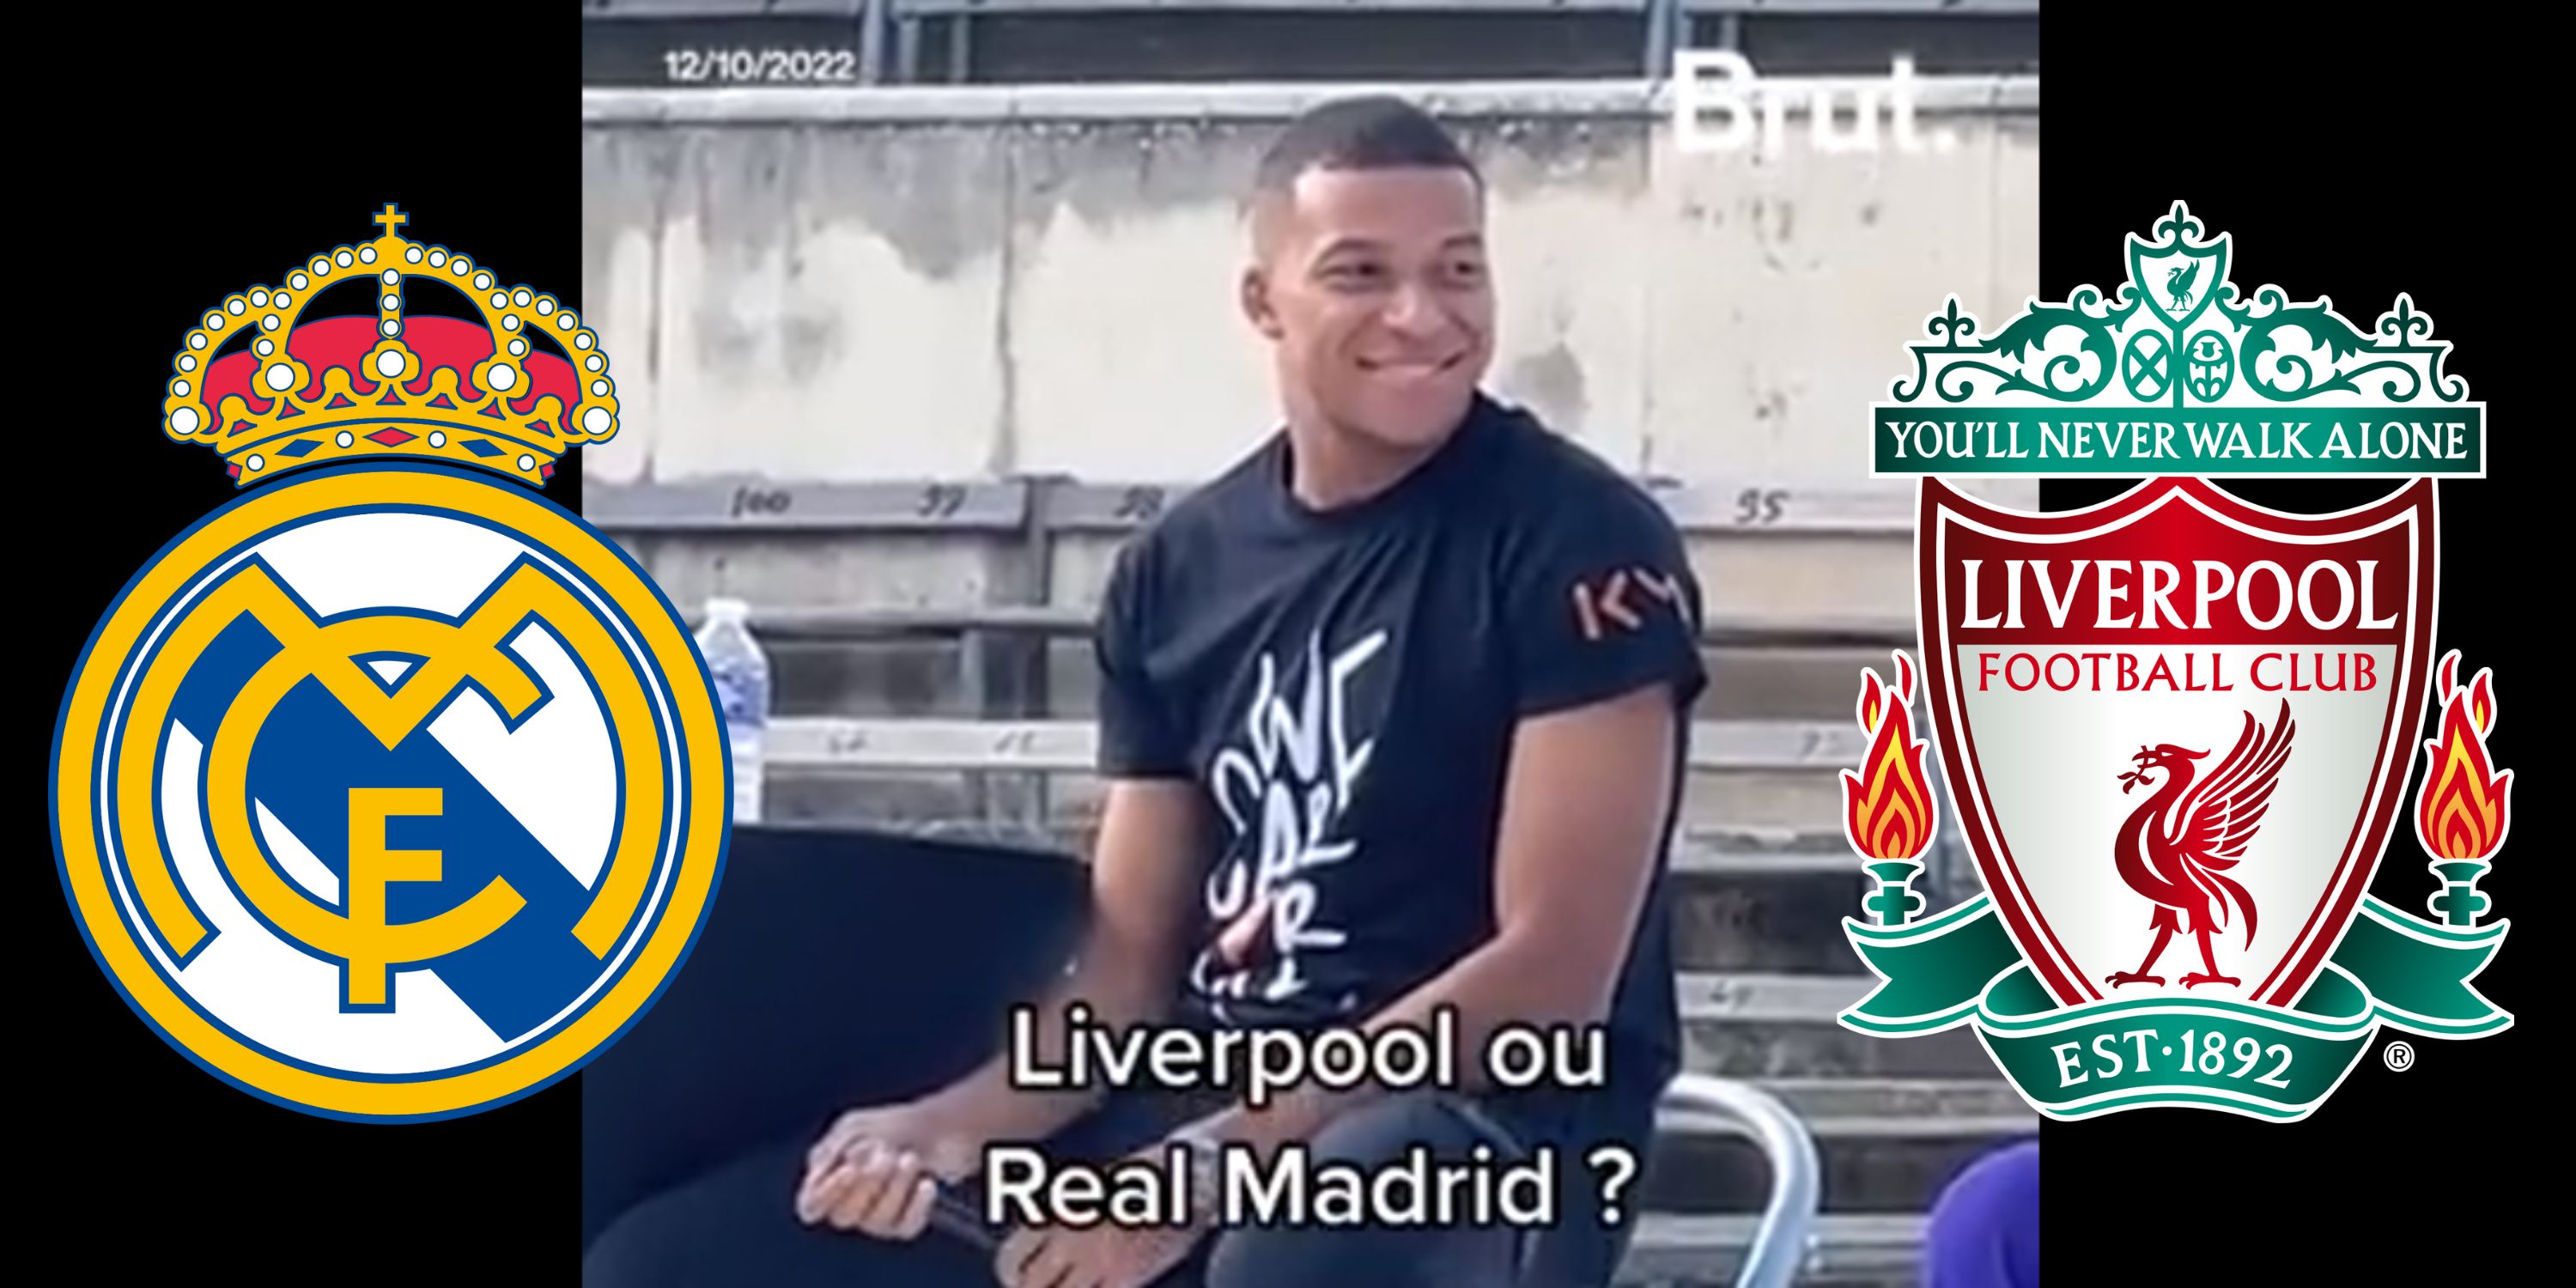 (Video) Mbappe reacts today to ‘Liverpool or Real Madrid?’ question